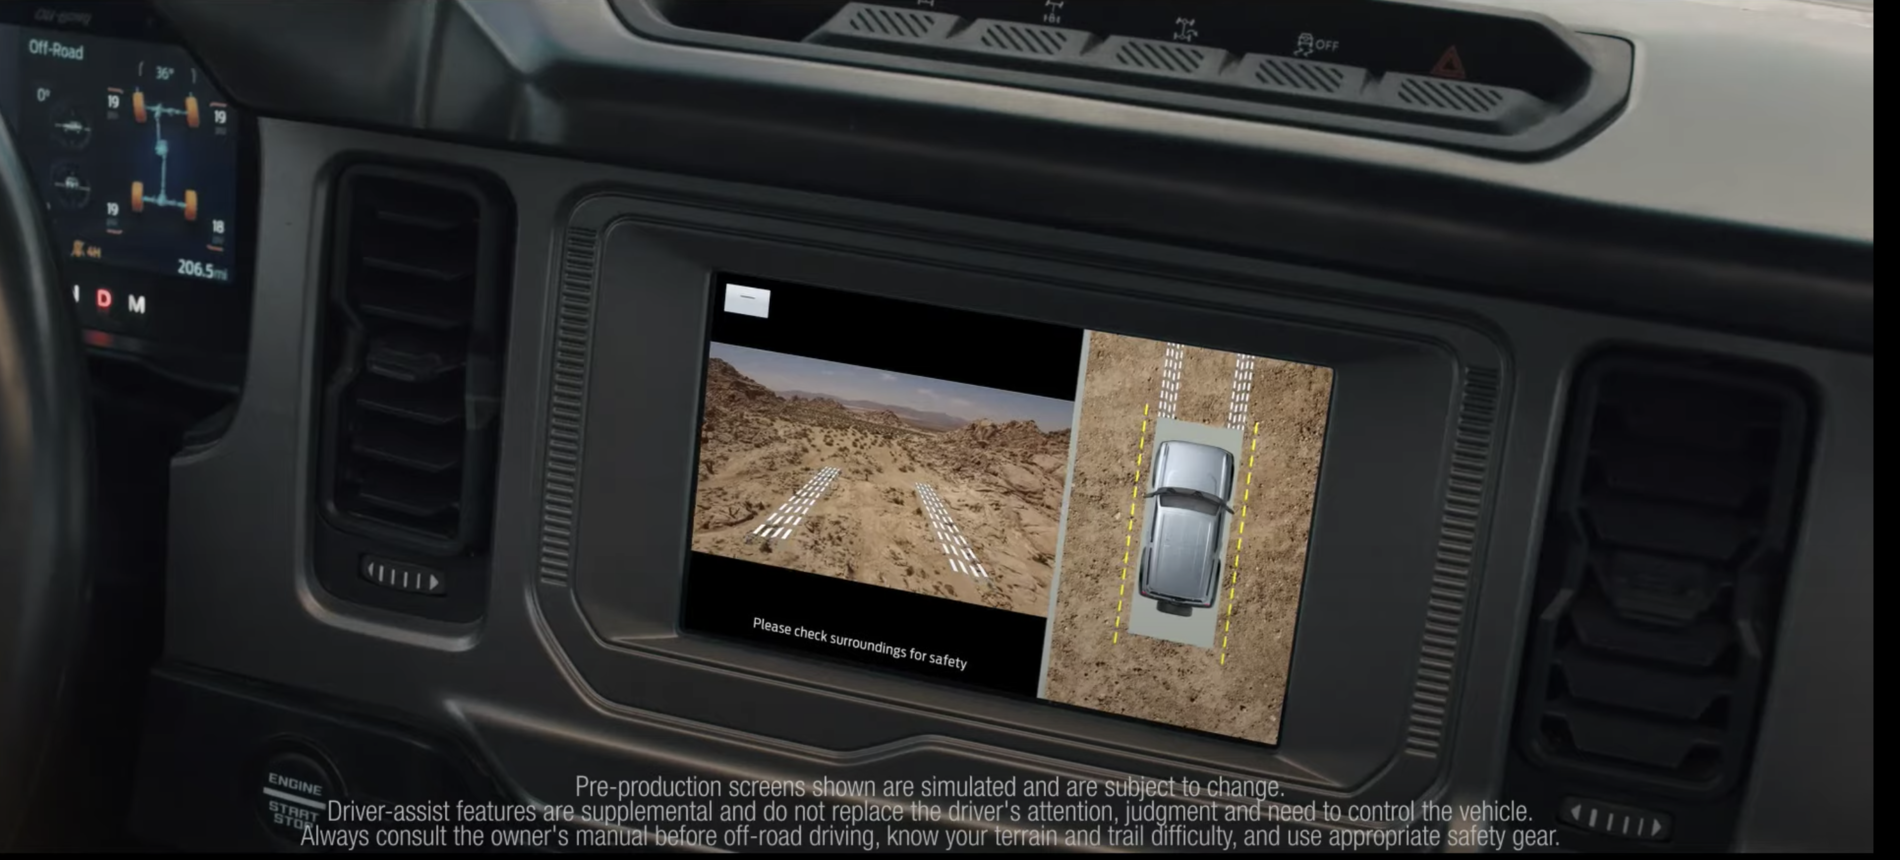 Ford Bronco Videos: 2021 Bronco Digital Gauge Cluster Display in Action. Hybrid / Electric Bronco Confirmed by "EV Coaching" Mode? Screen Shot 2020-07-16 at 11.10.45 AM